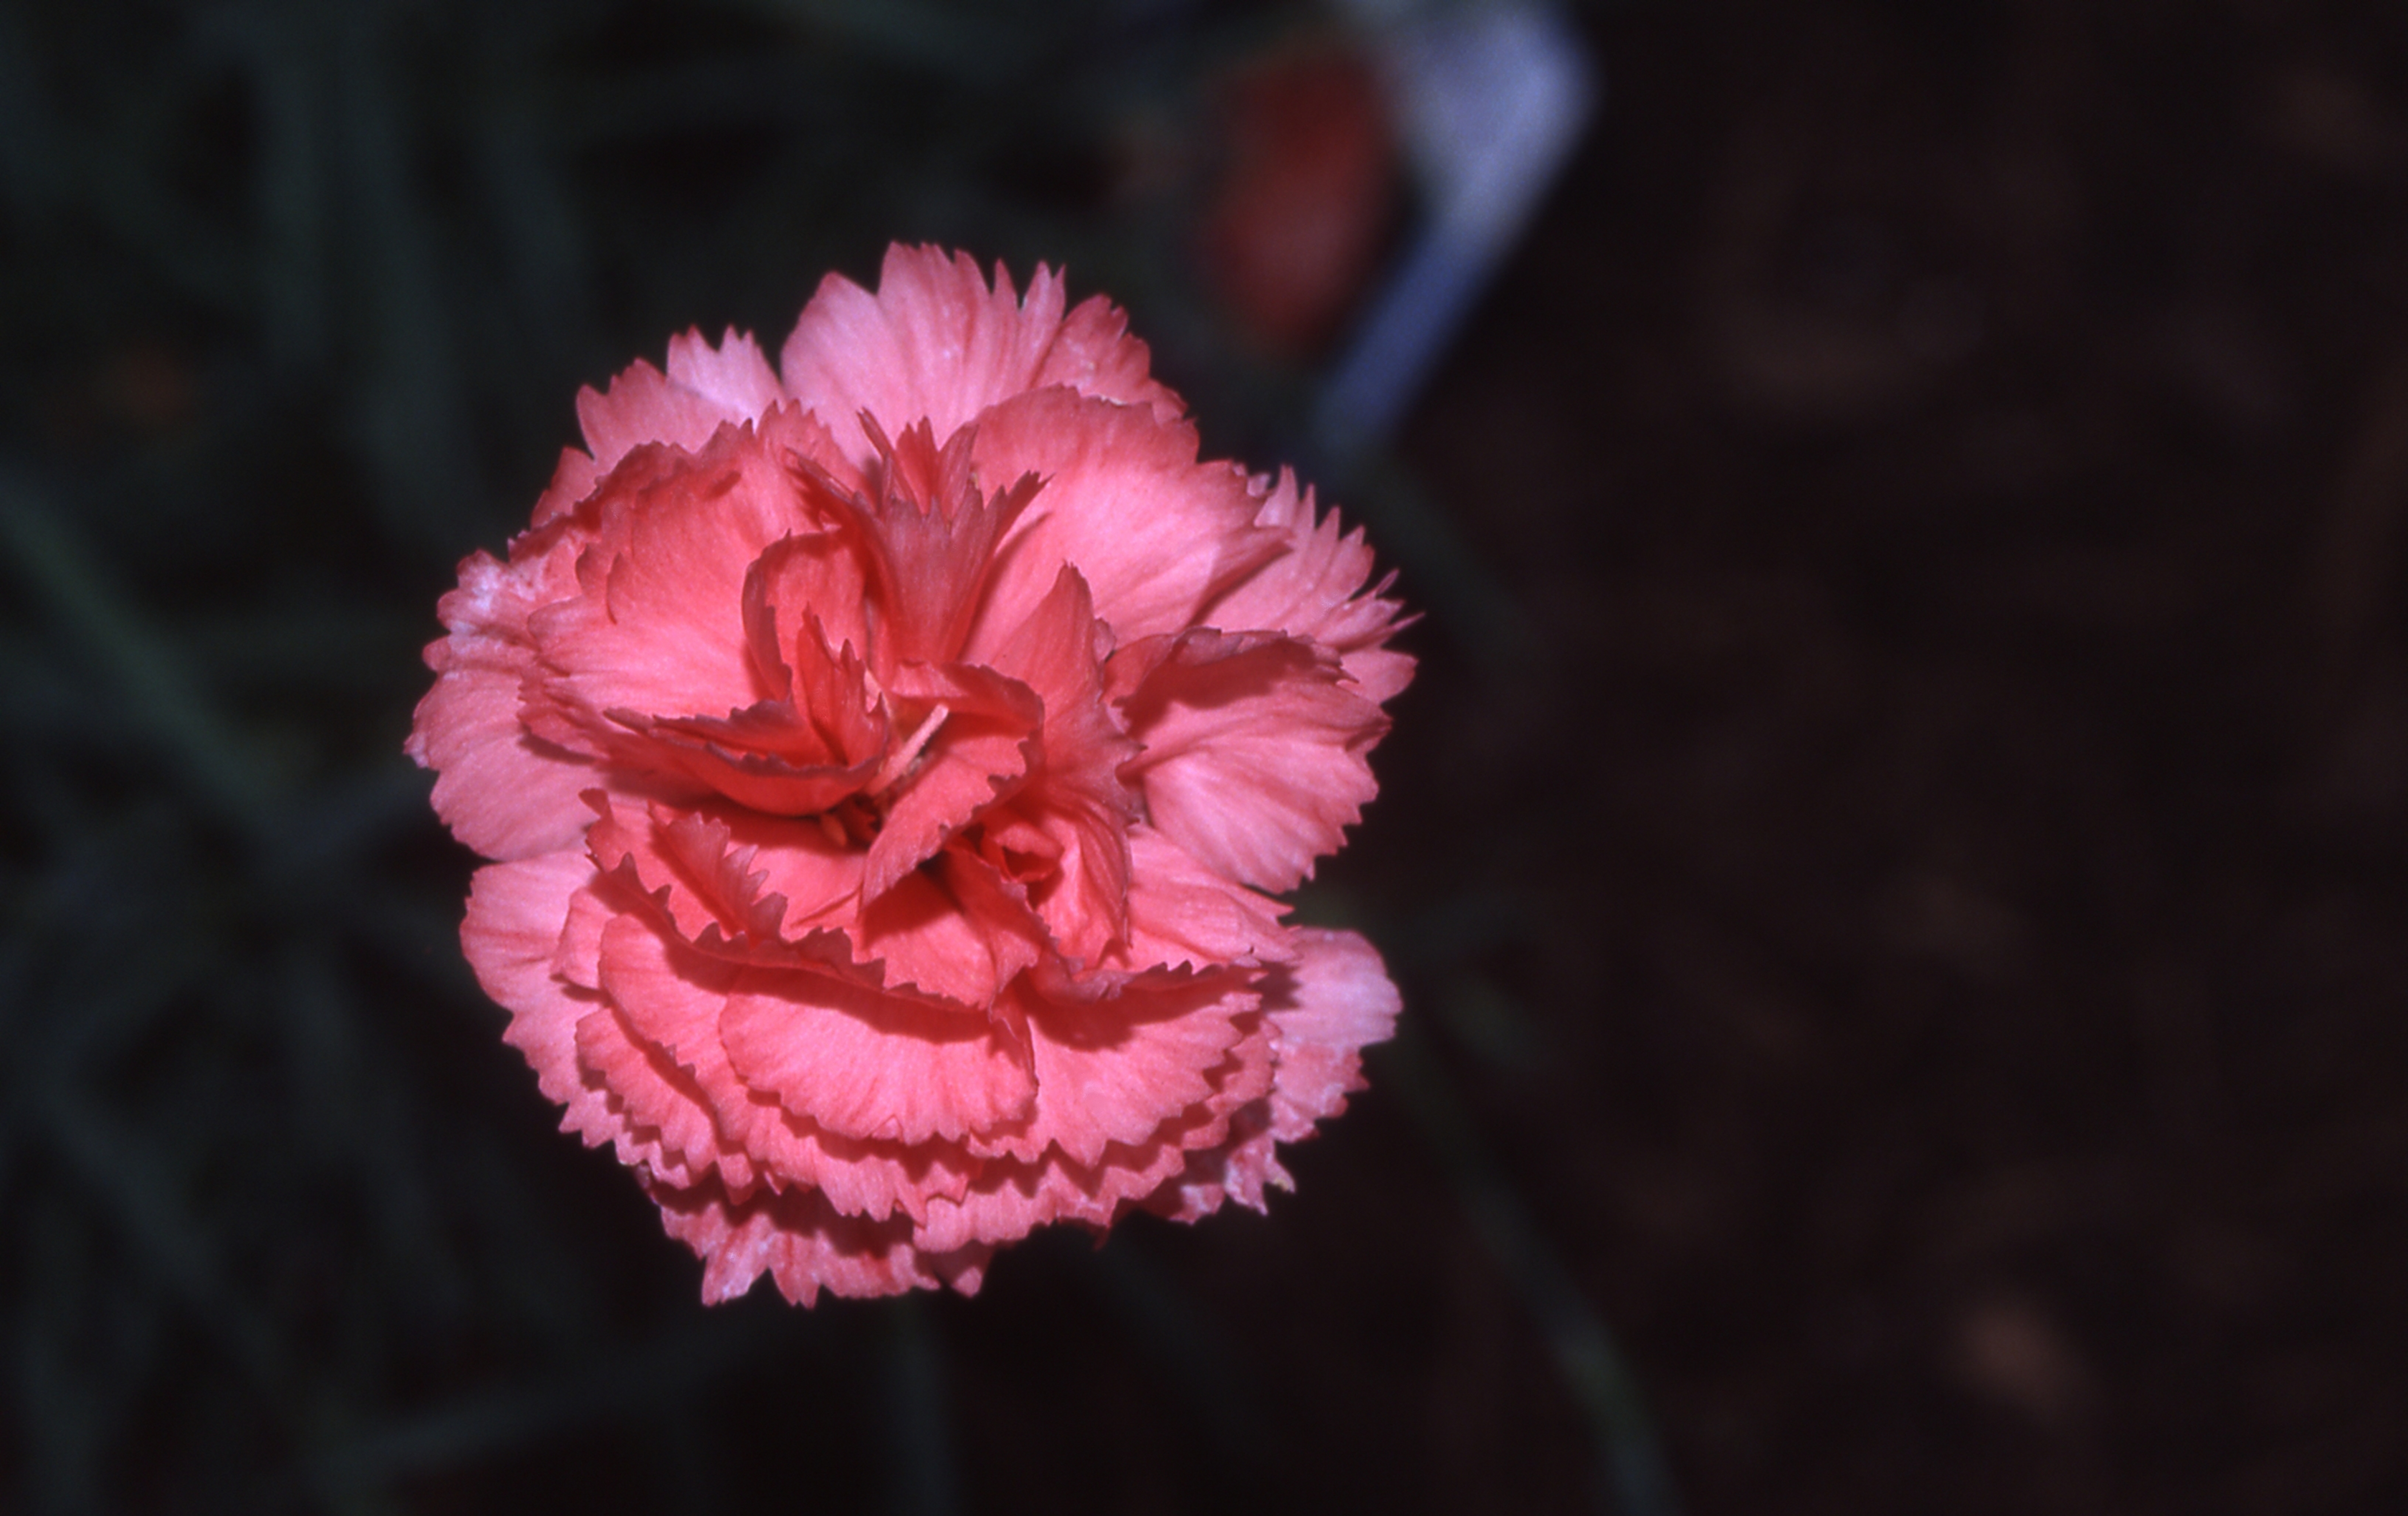 Dianthus X allwoodii ‘Old Spice’ - Old Spice Dianthus